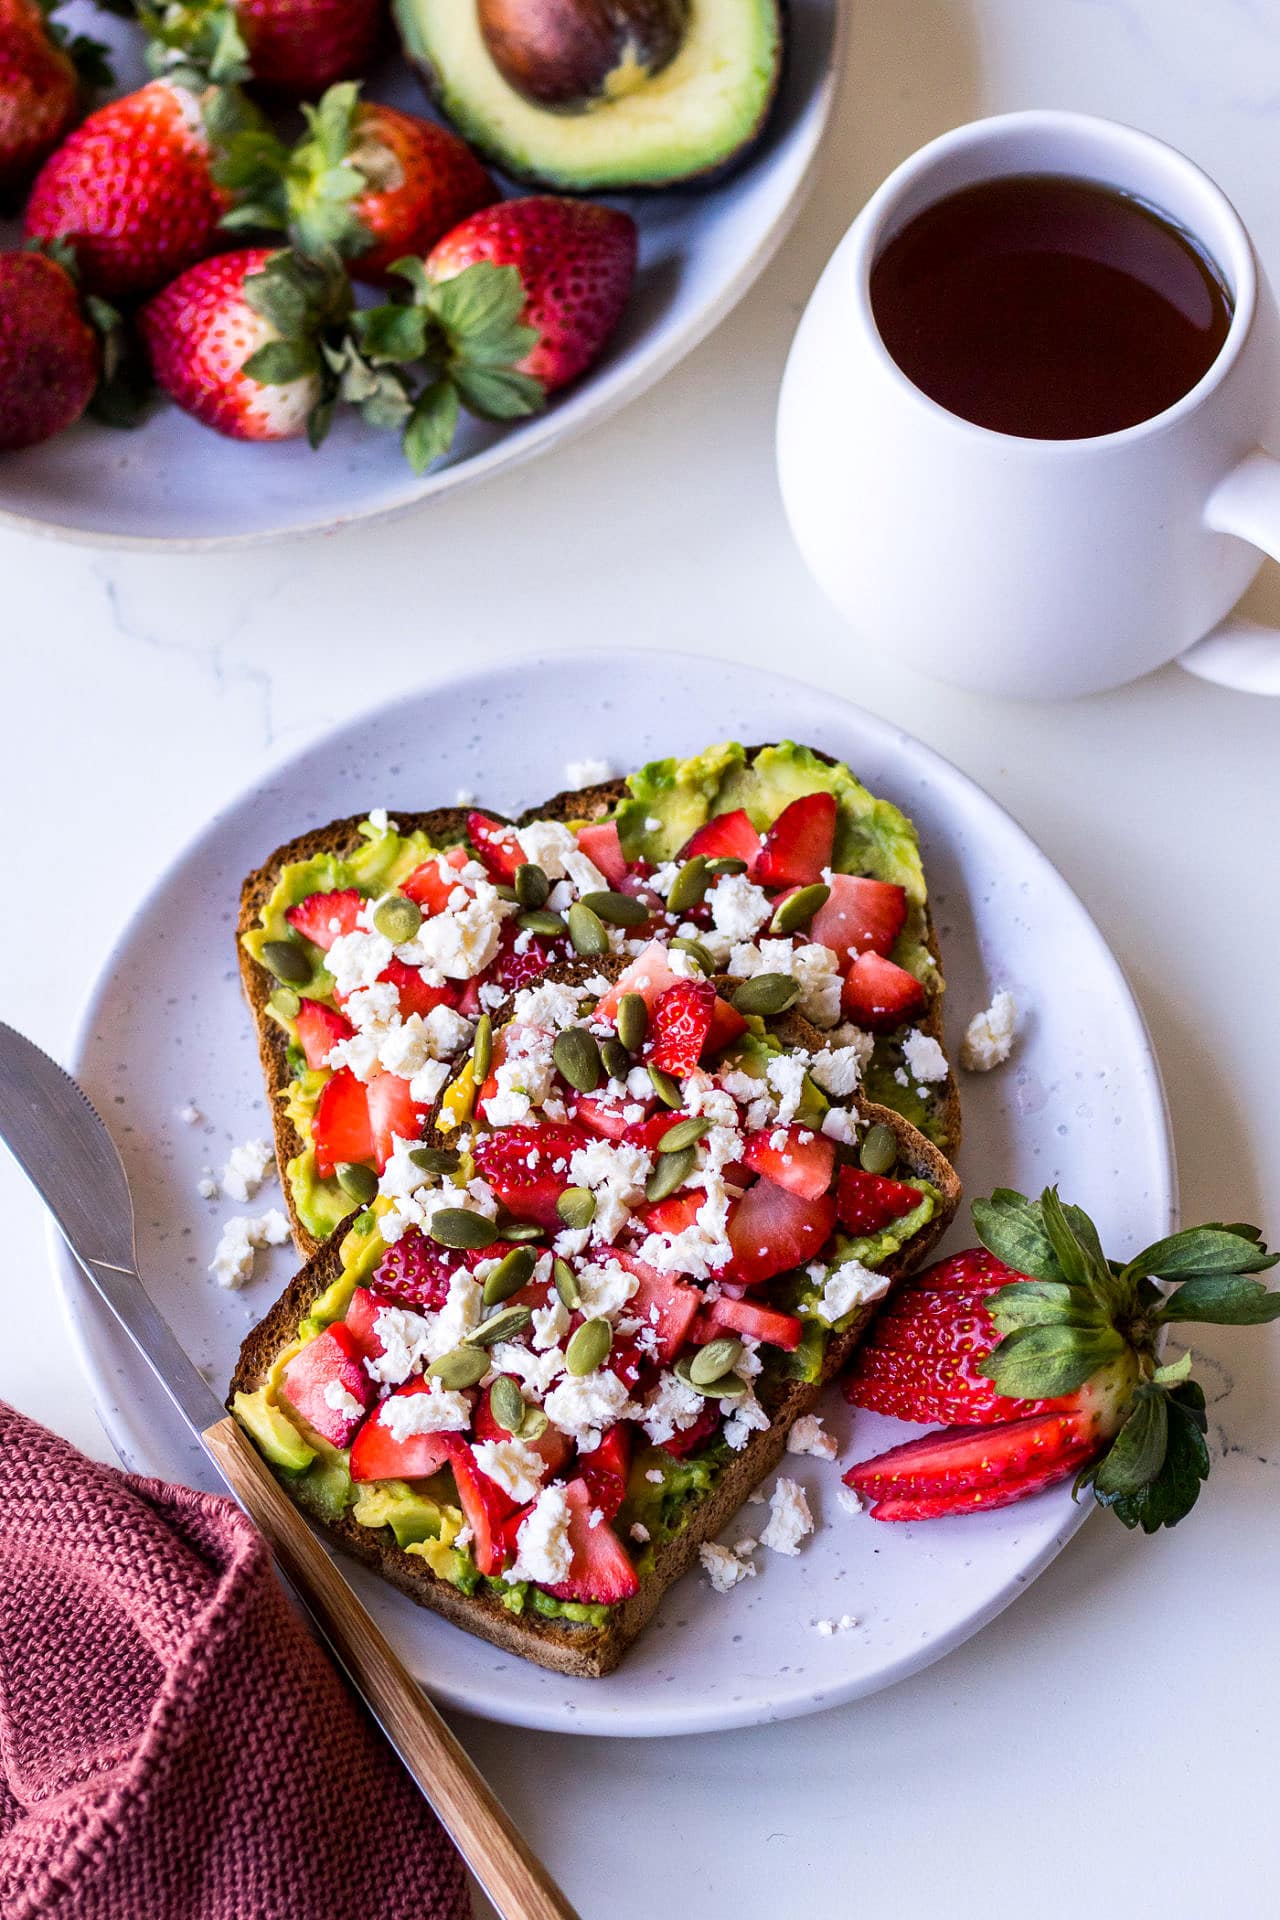 Avocado toast with diced strawberries and feta, and a cup of tea